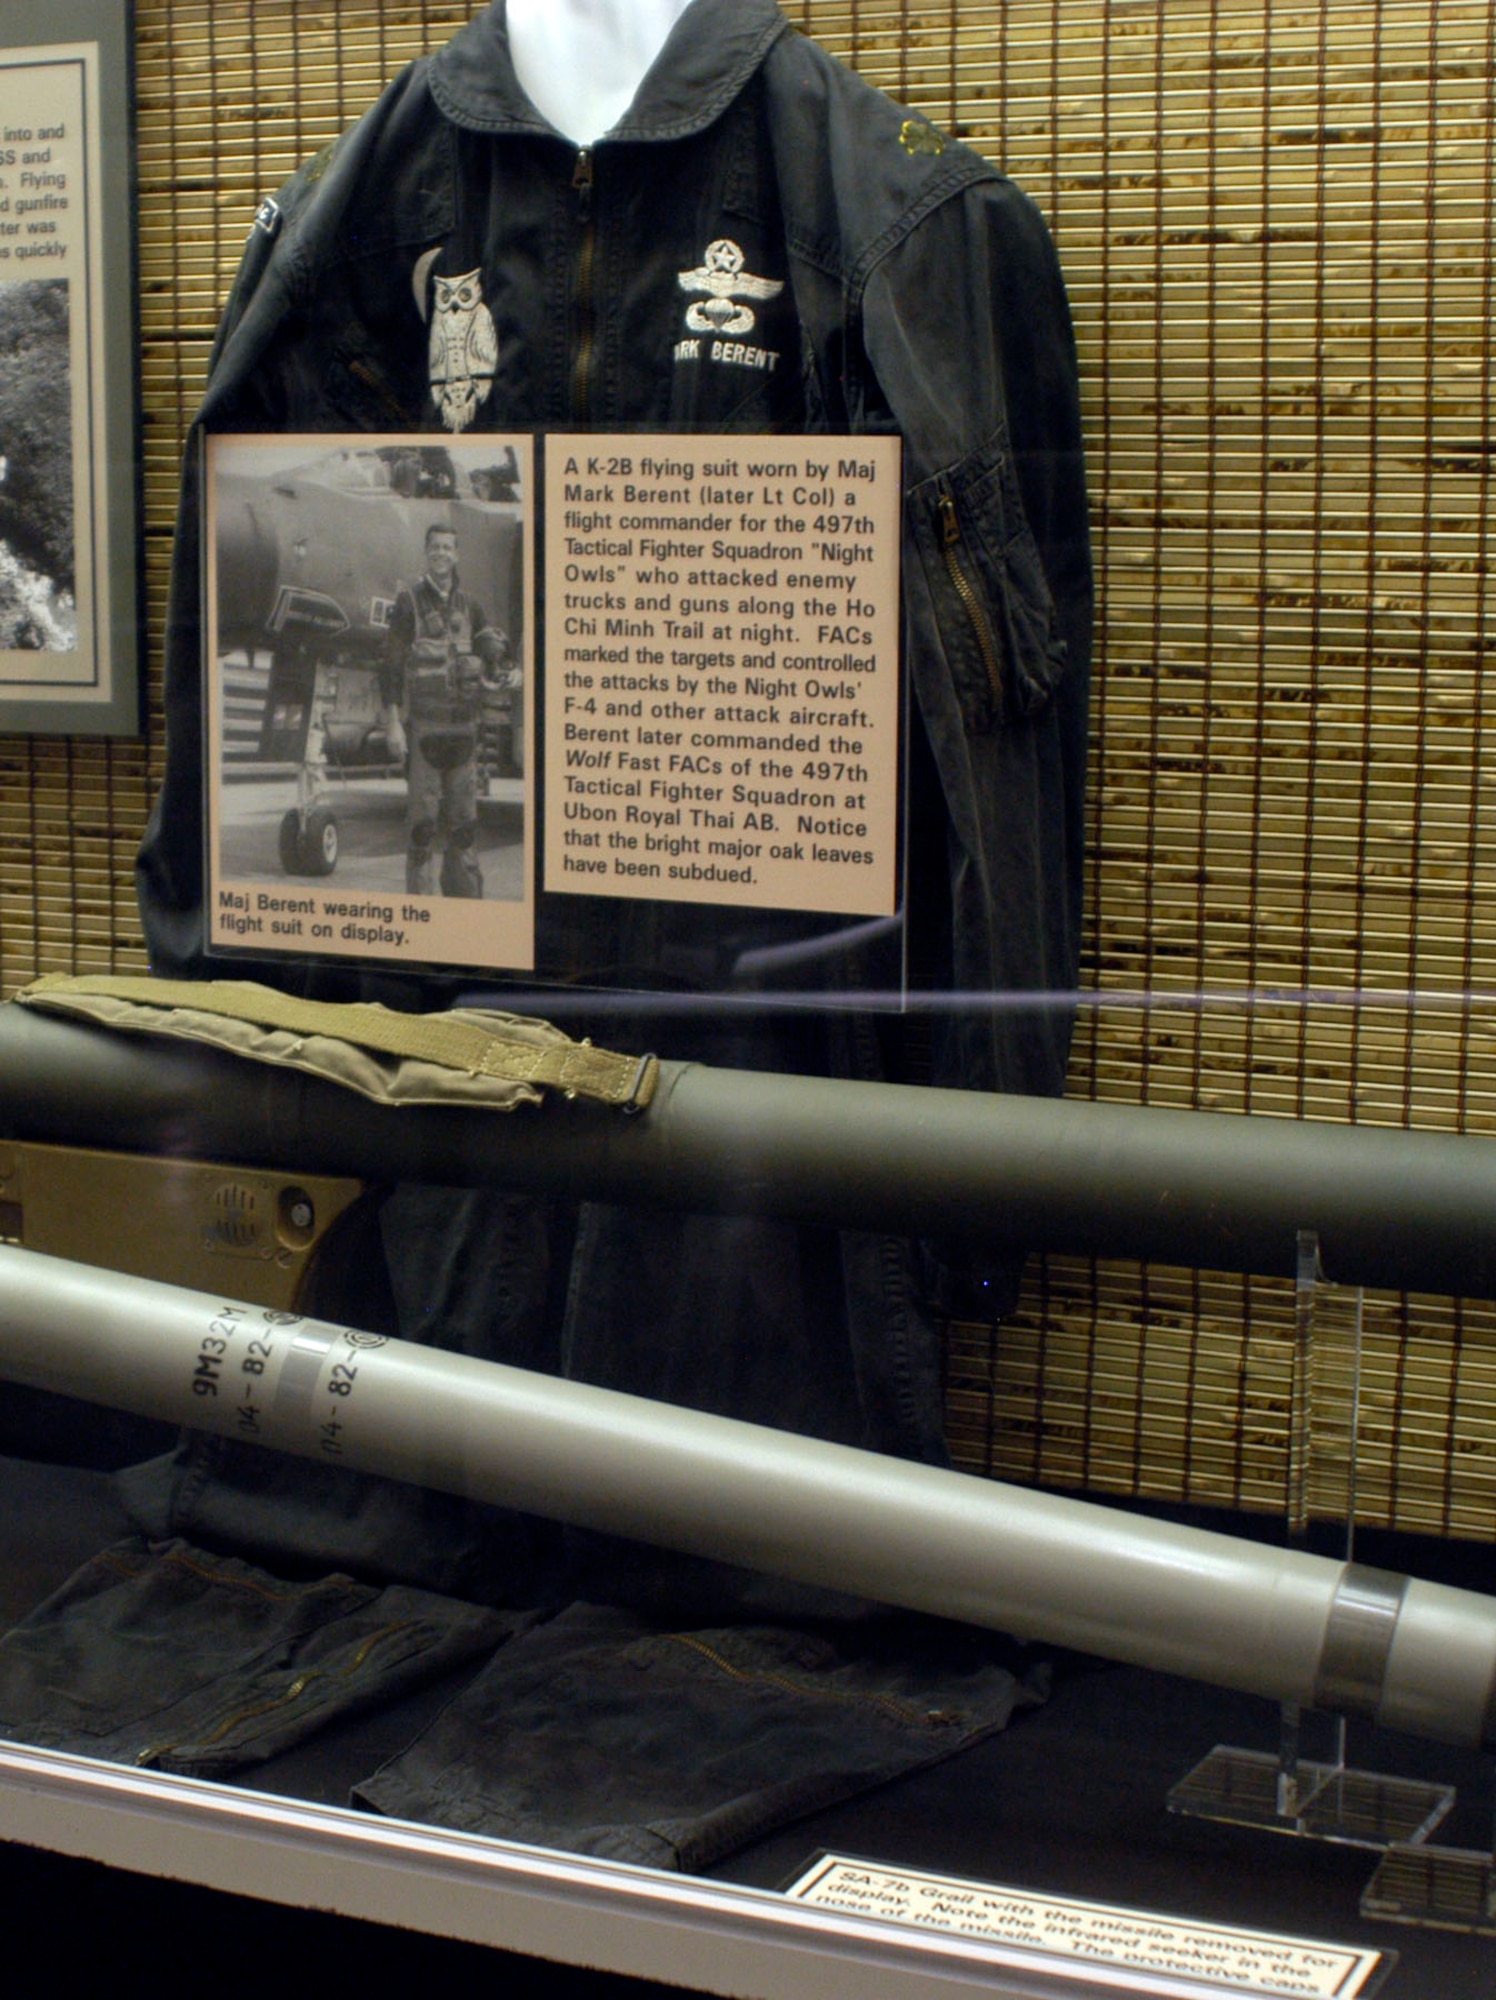 DAYTON, Ohio - A K-2B flying suit worn by Maj. Mark Berent (later Lt. Col.) a flight commander for the 497th Tactical Fighter Squadron “Night Owls” who attacked enemy trucks and guns along the Ho Chi Minh Trail at night. FACs marked the targets and controlled the attacks by the Night Owls’ F-4 and other attack aircraft. Berent later commanded the Wolf Fast FACs of the 497th Tactical Fighter Squadron 8th Tactical Fighter Wing at Ubon Royal Thai AB. Notice that the bright major oak leaves have been subdued. This K-2B flying suit is on display in the Southeast Asia War Gallery at the National Museum of the U.S. Air Force. (U.S. Air Force photo)